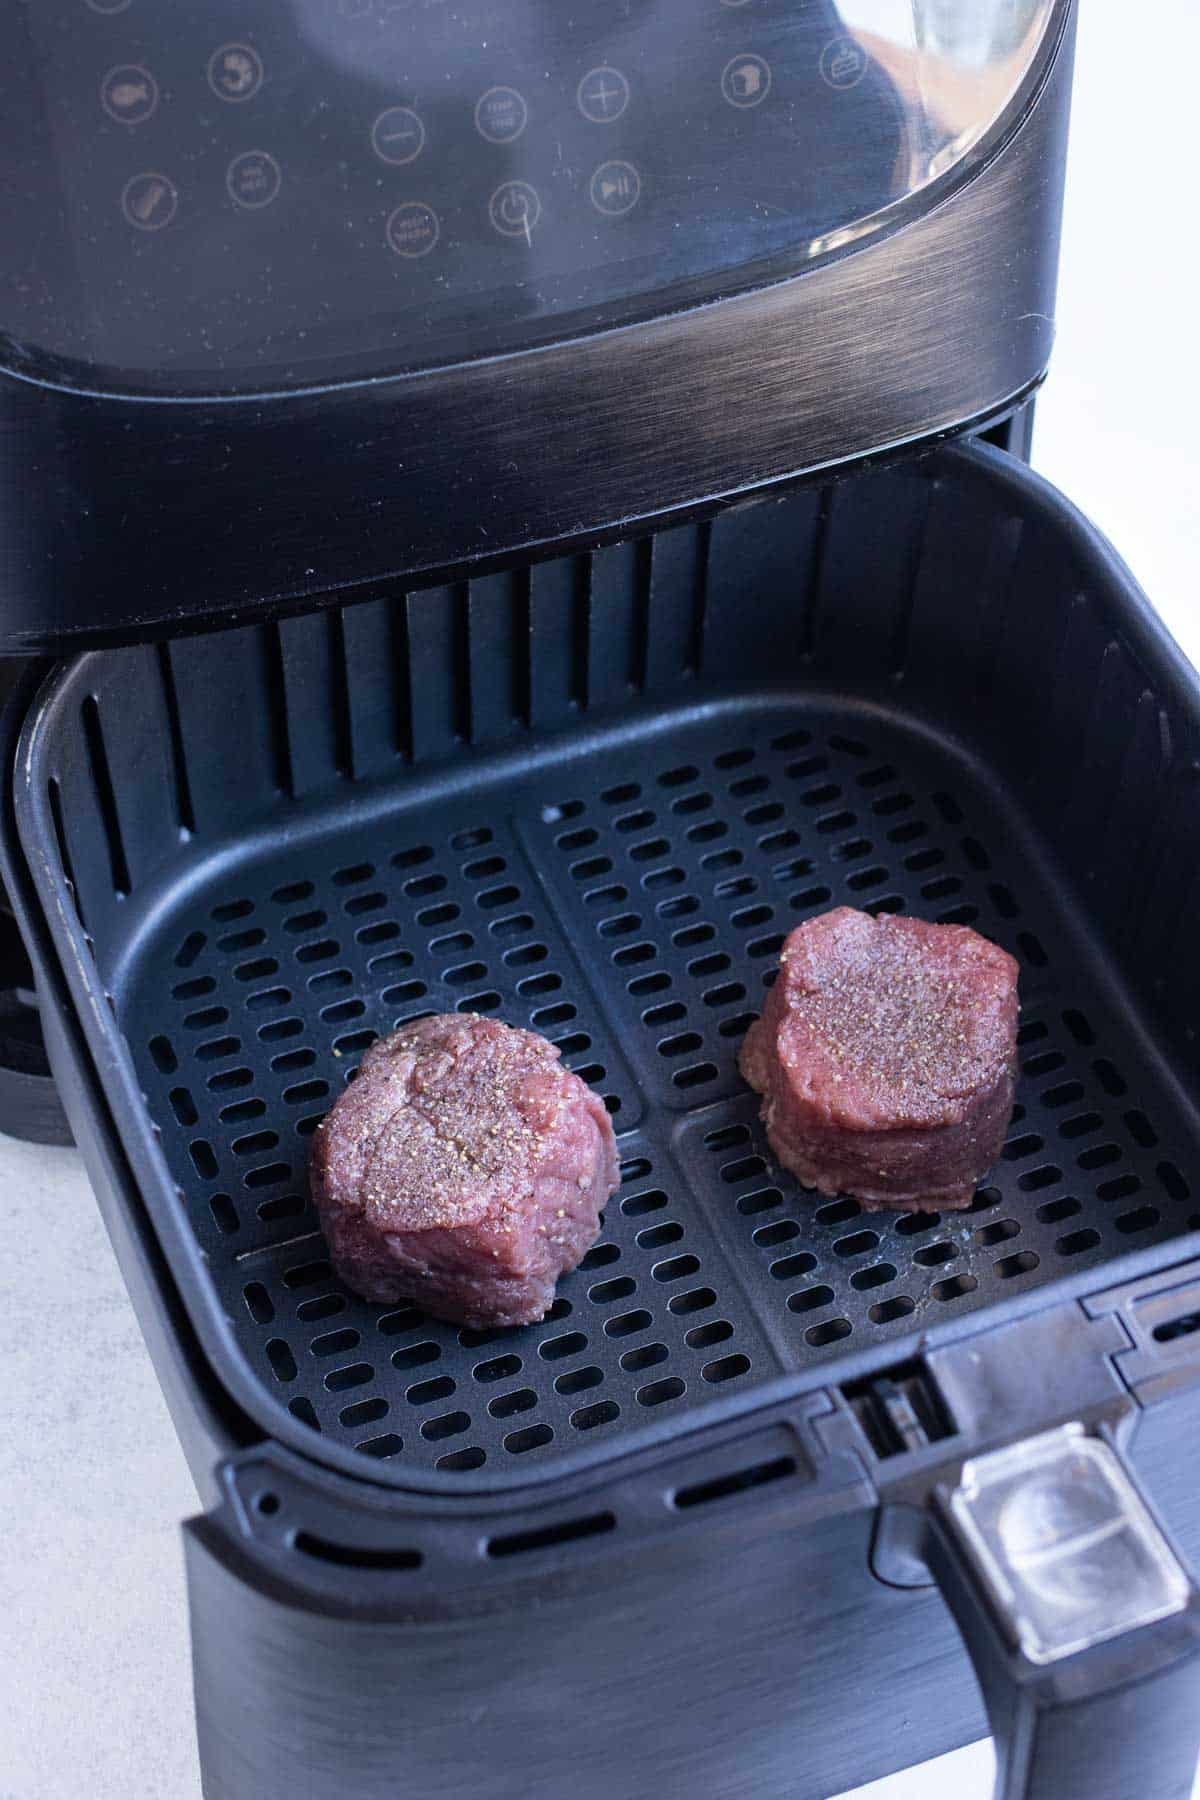 Two pieces of steak are placed in the air fryer.